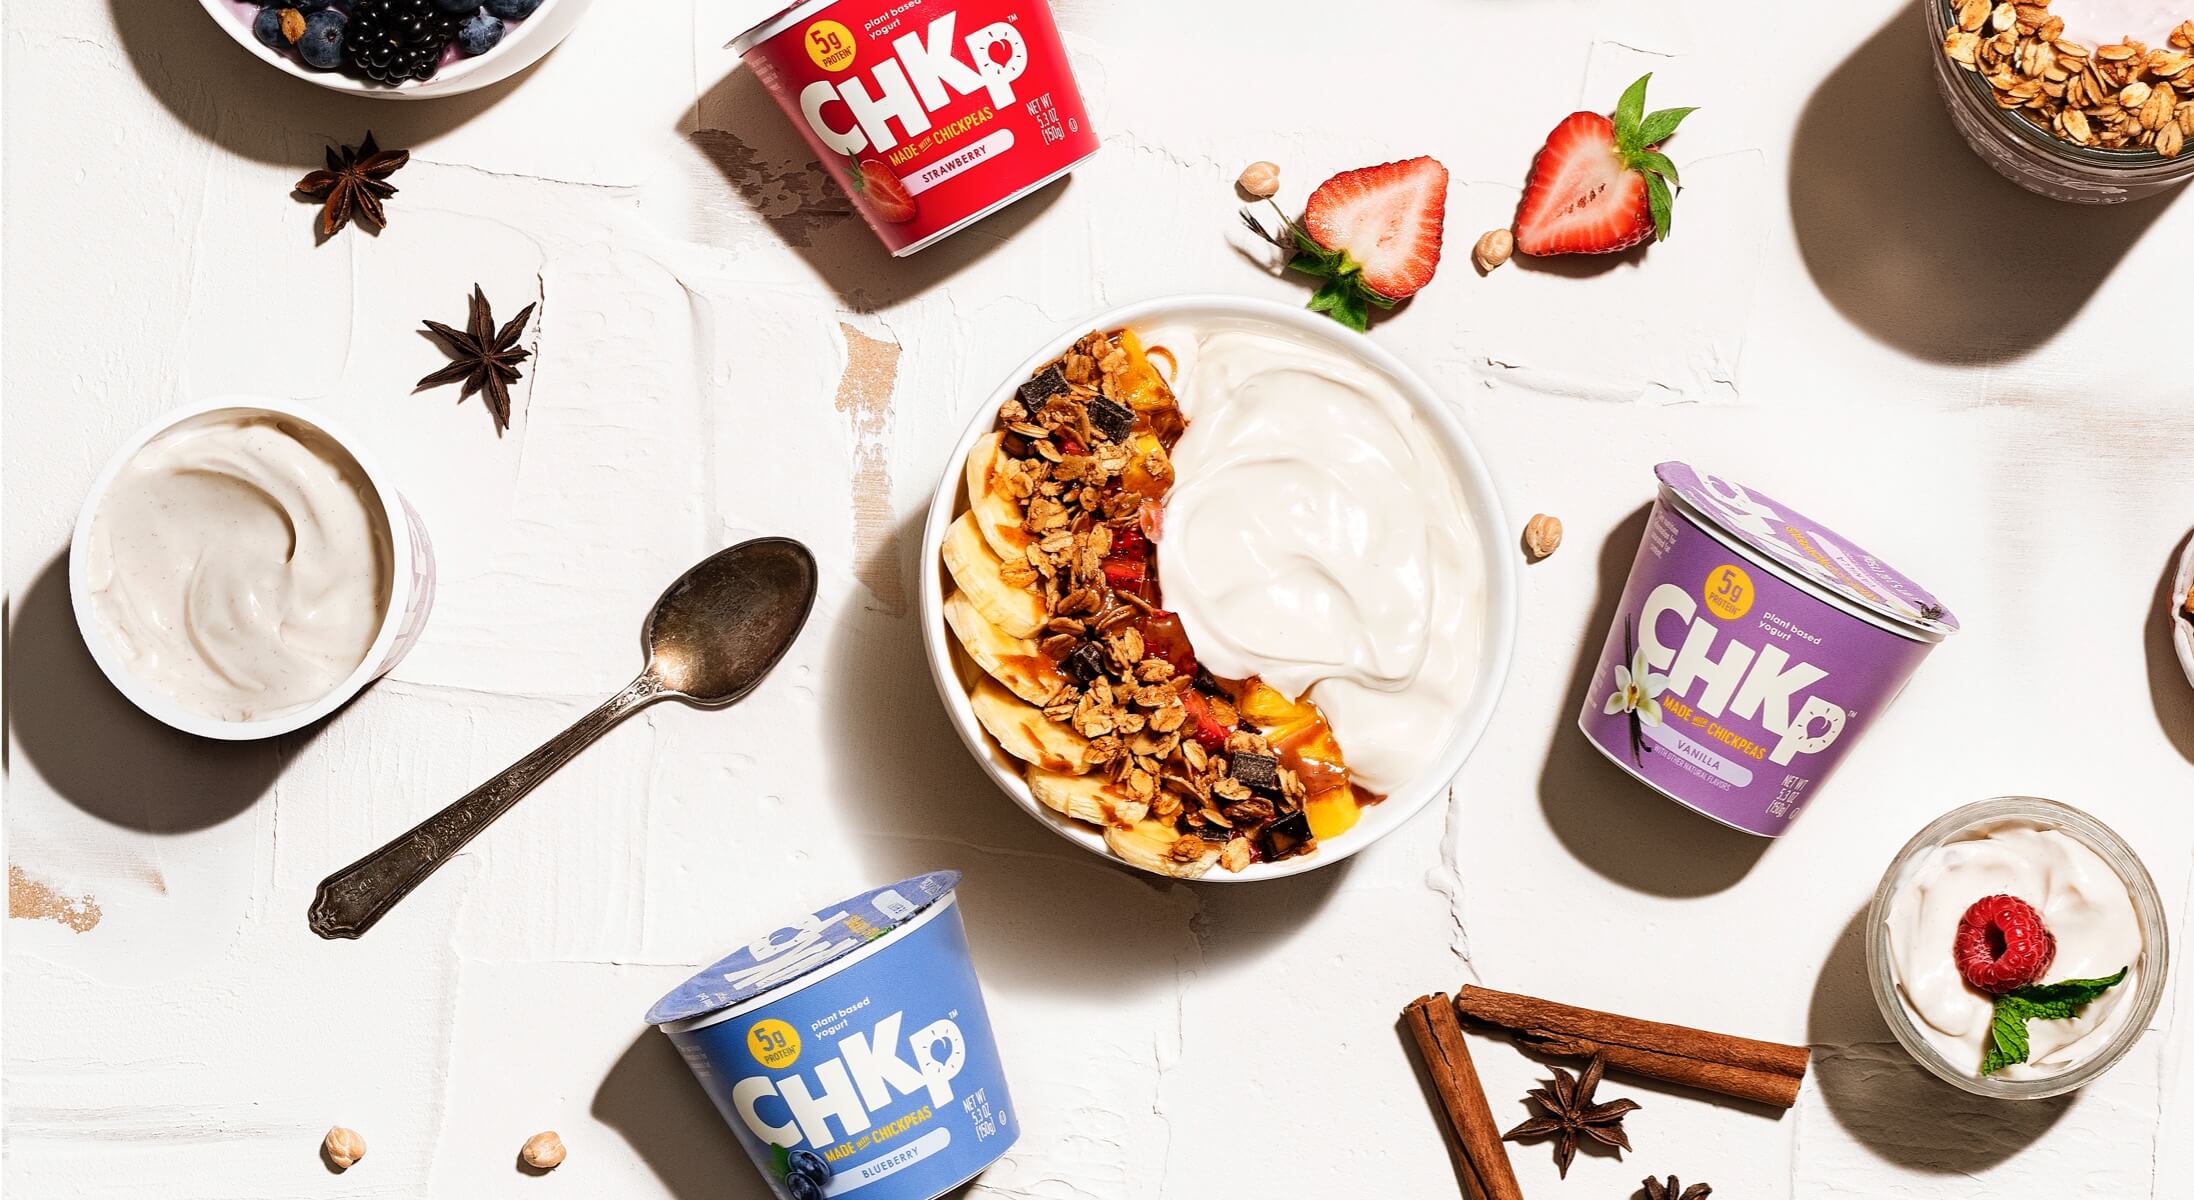 Smooth, creamy <br />plant-based yogurt <br />made from… chickpeas?